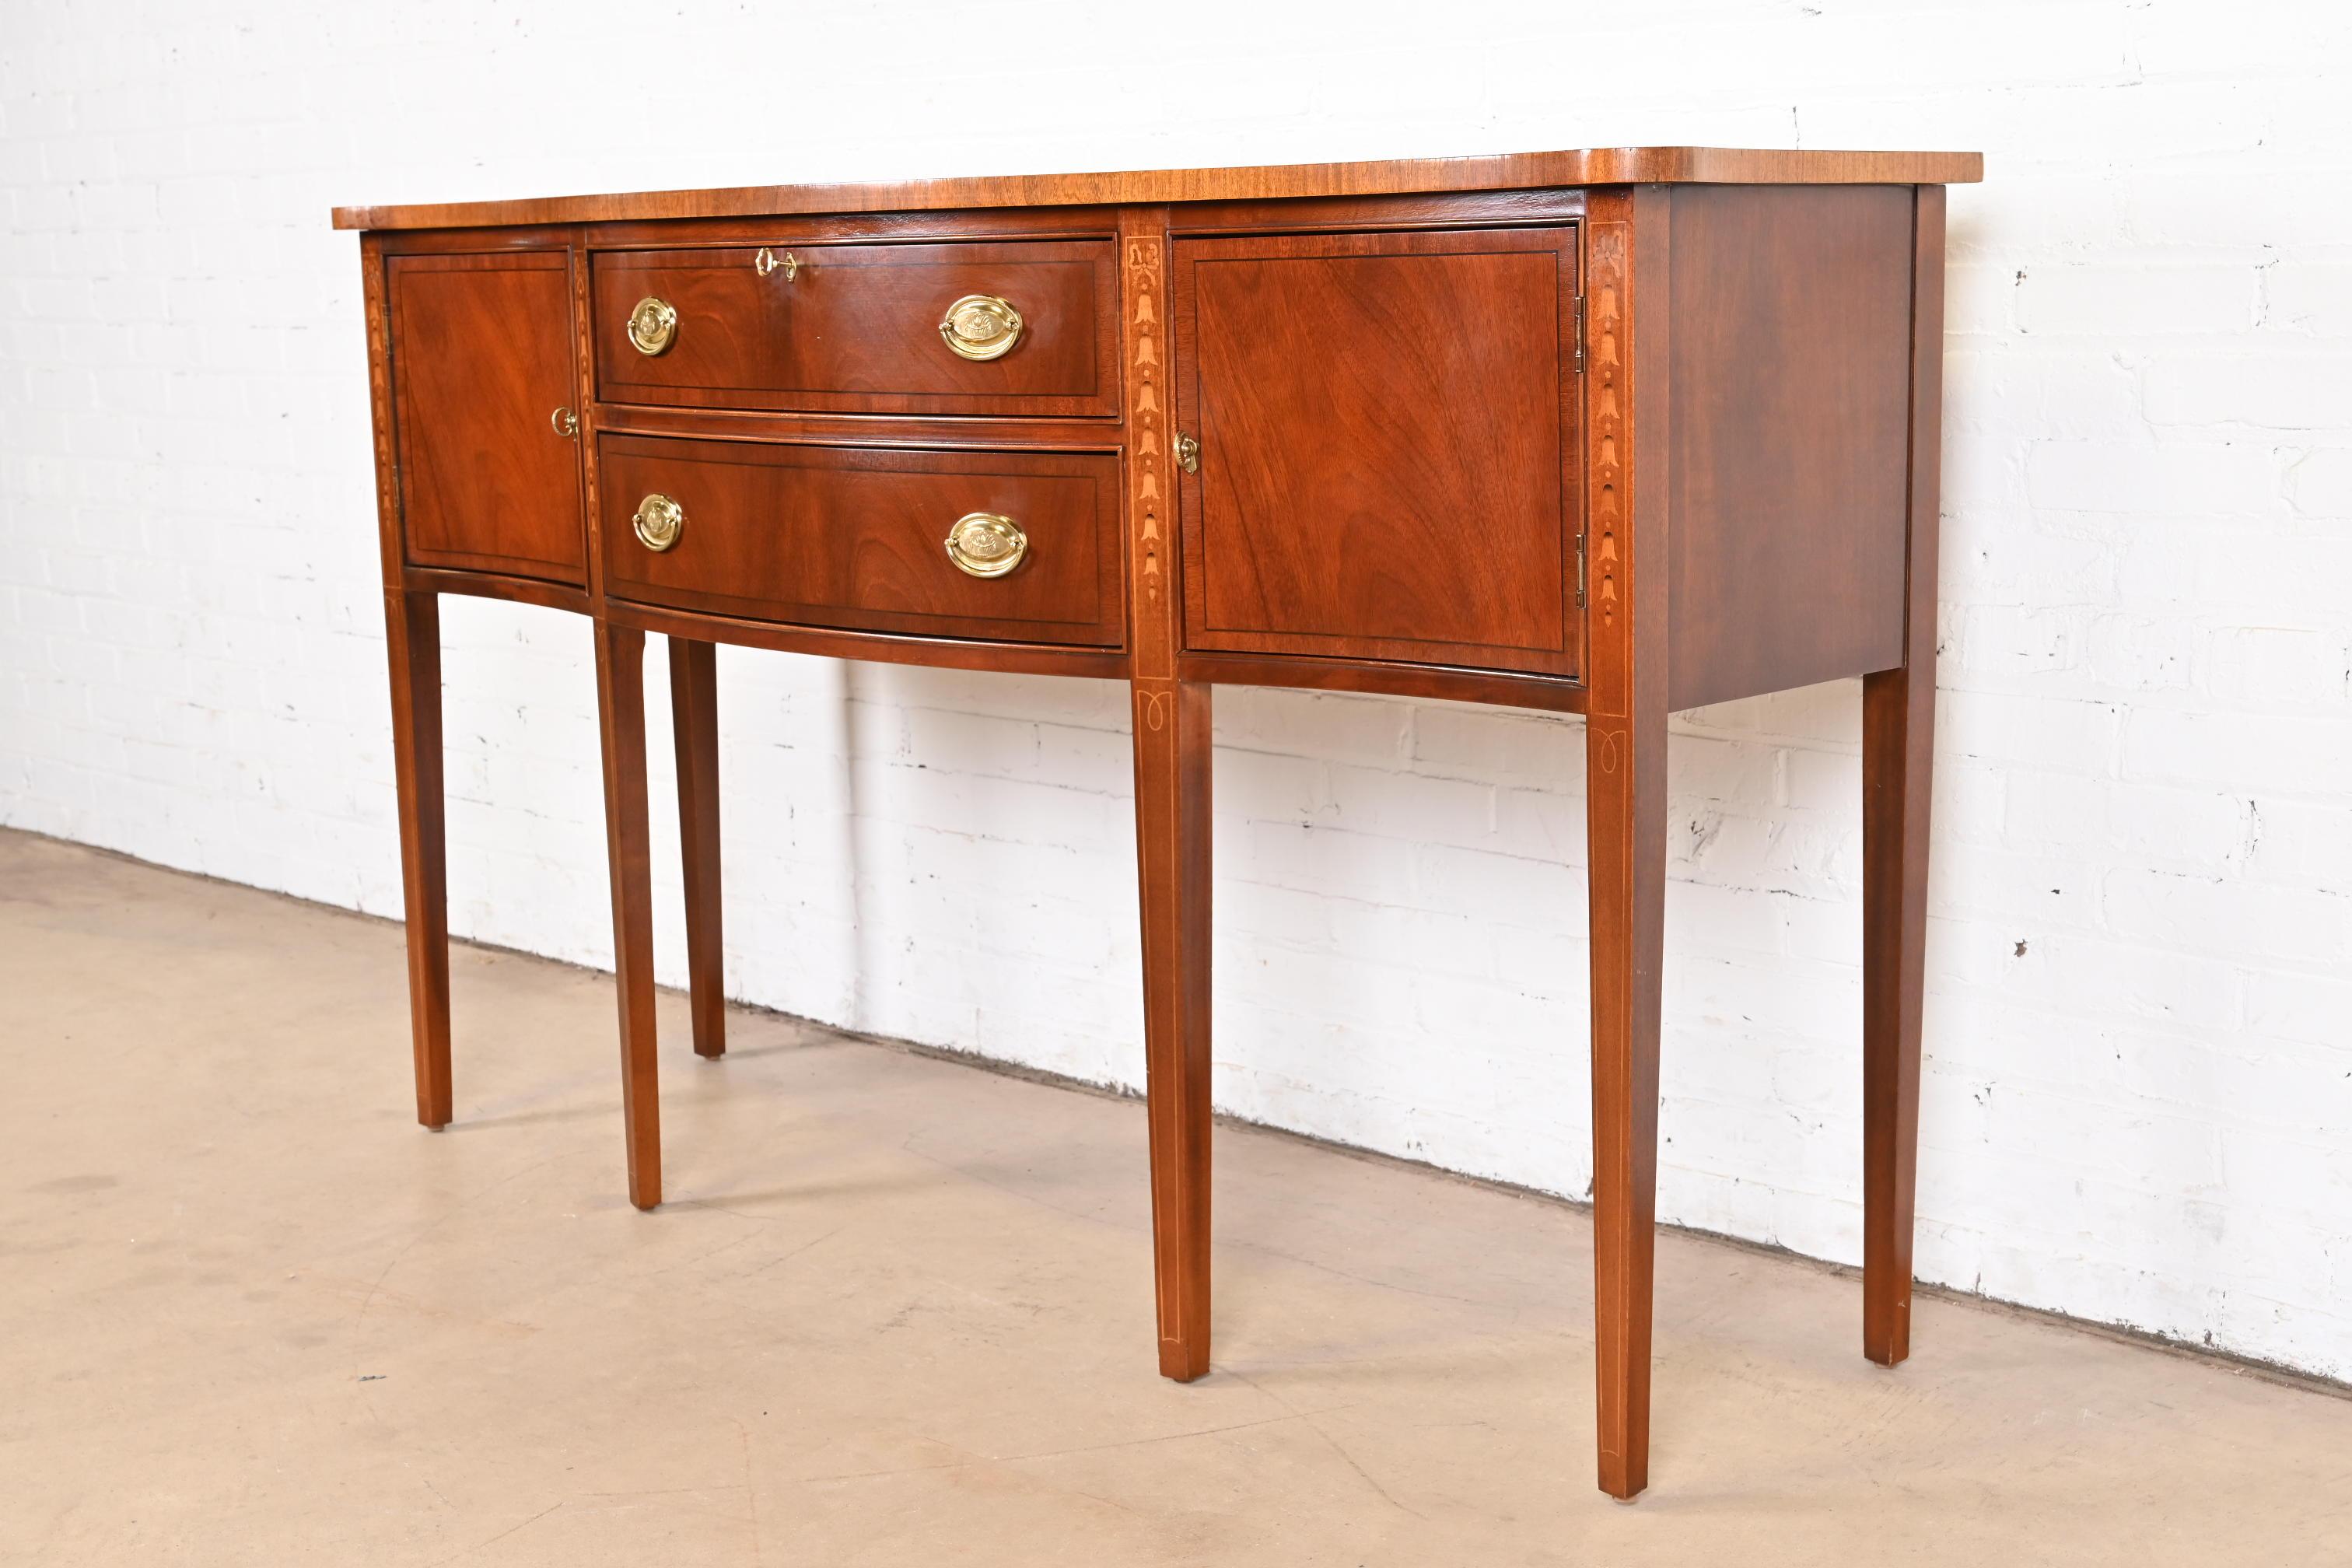 Hepplewhite Inlaid Mahogany Serpentine Front Sideboard Credenza In Good Condition For Sale In South Bend, IN